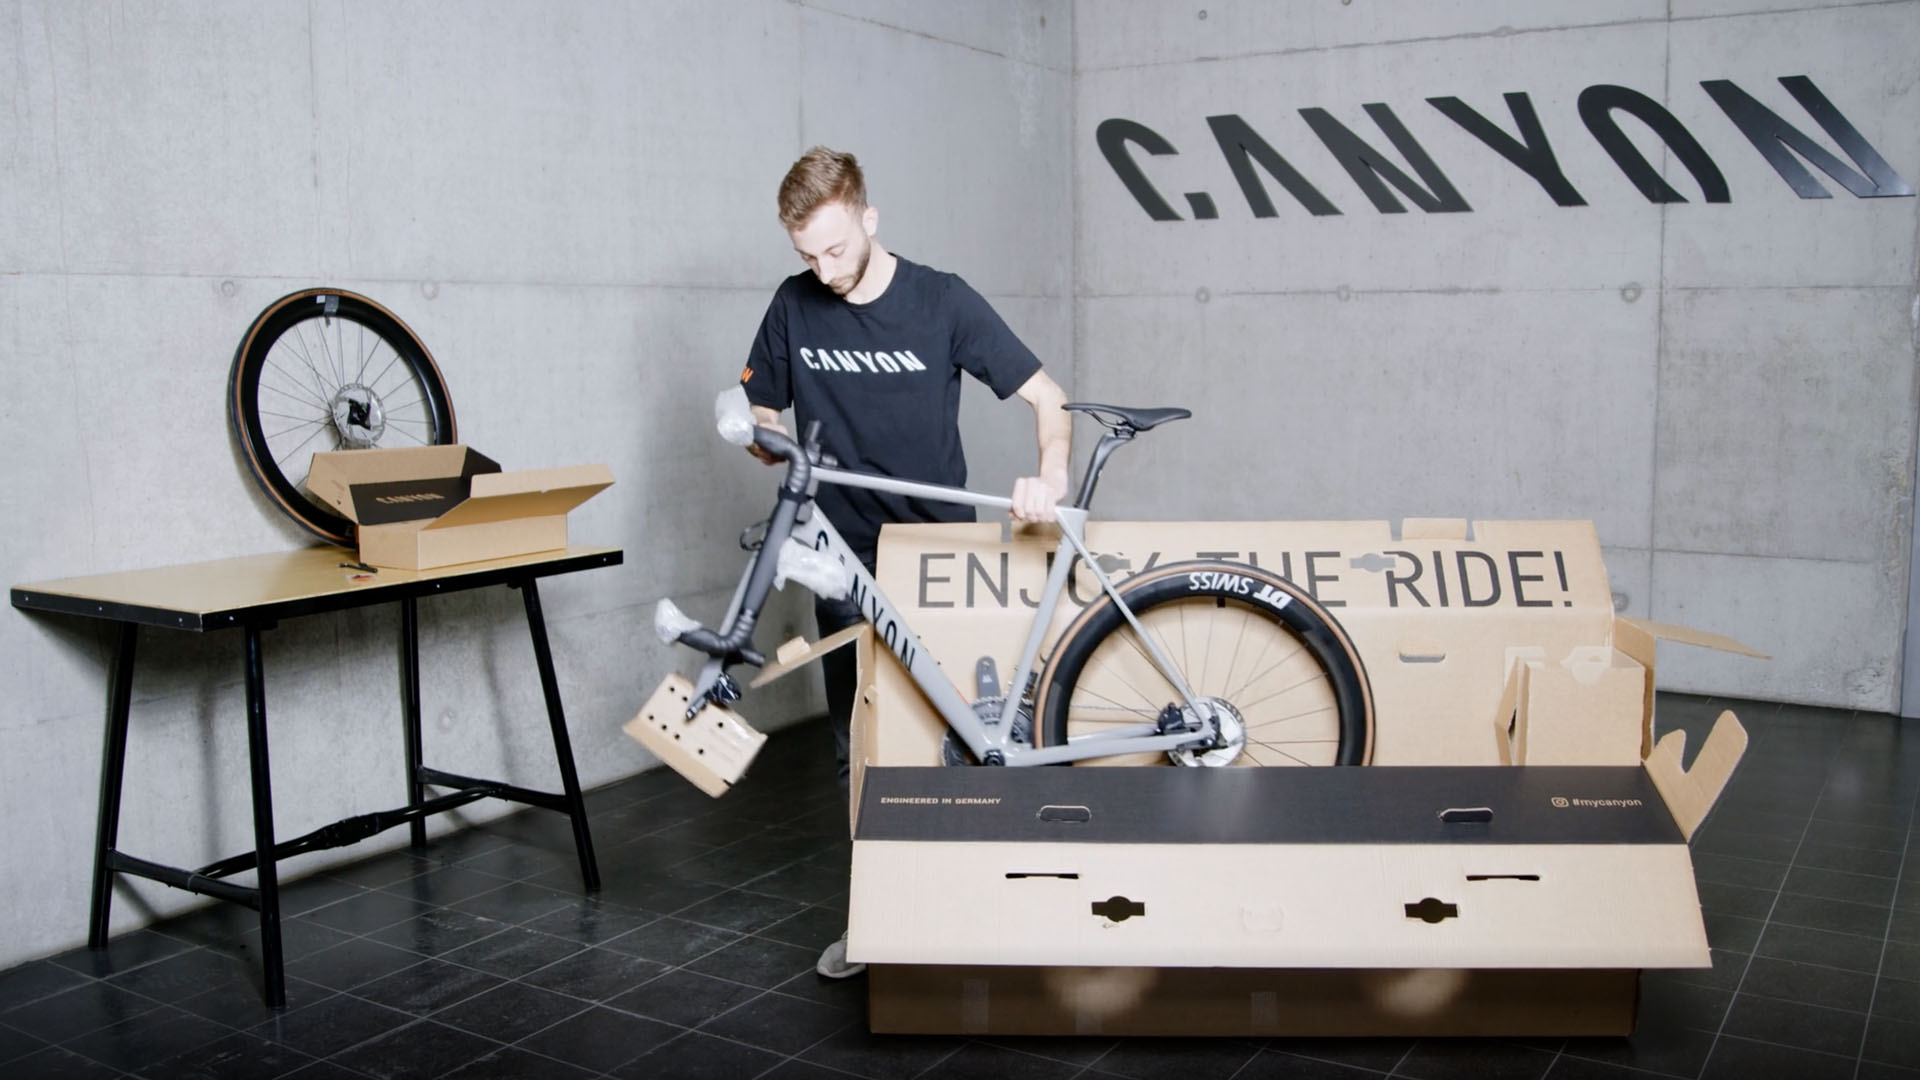 Unbox and assemble your Canyon road bike